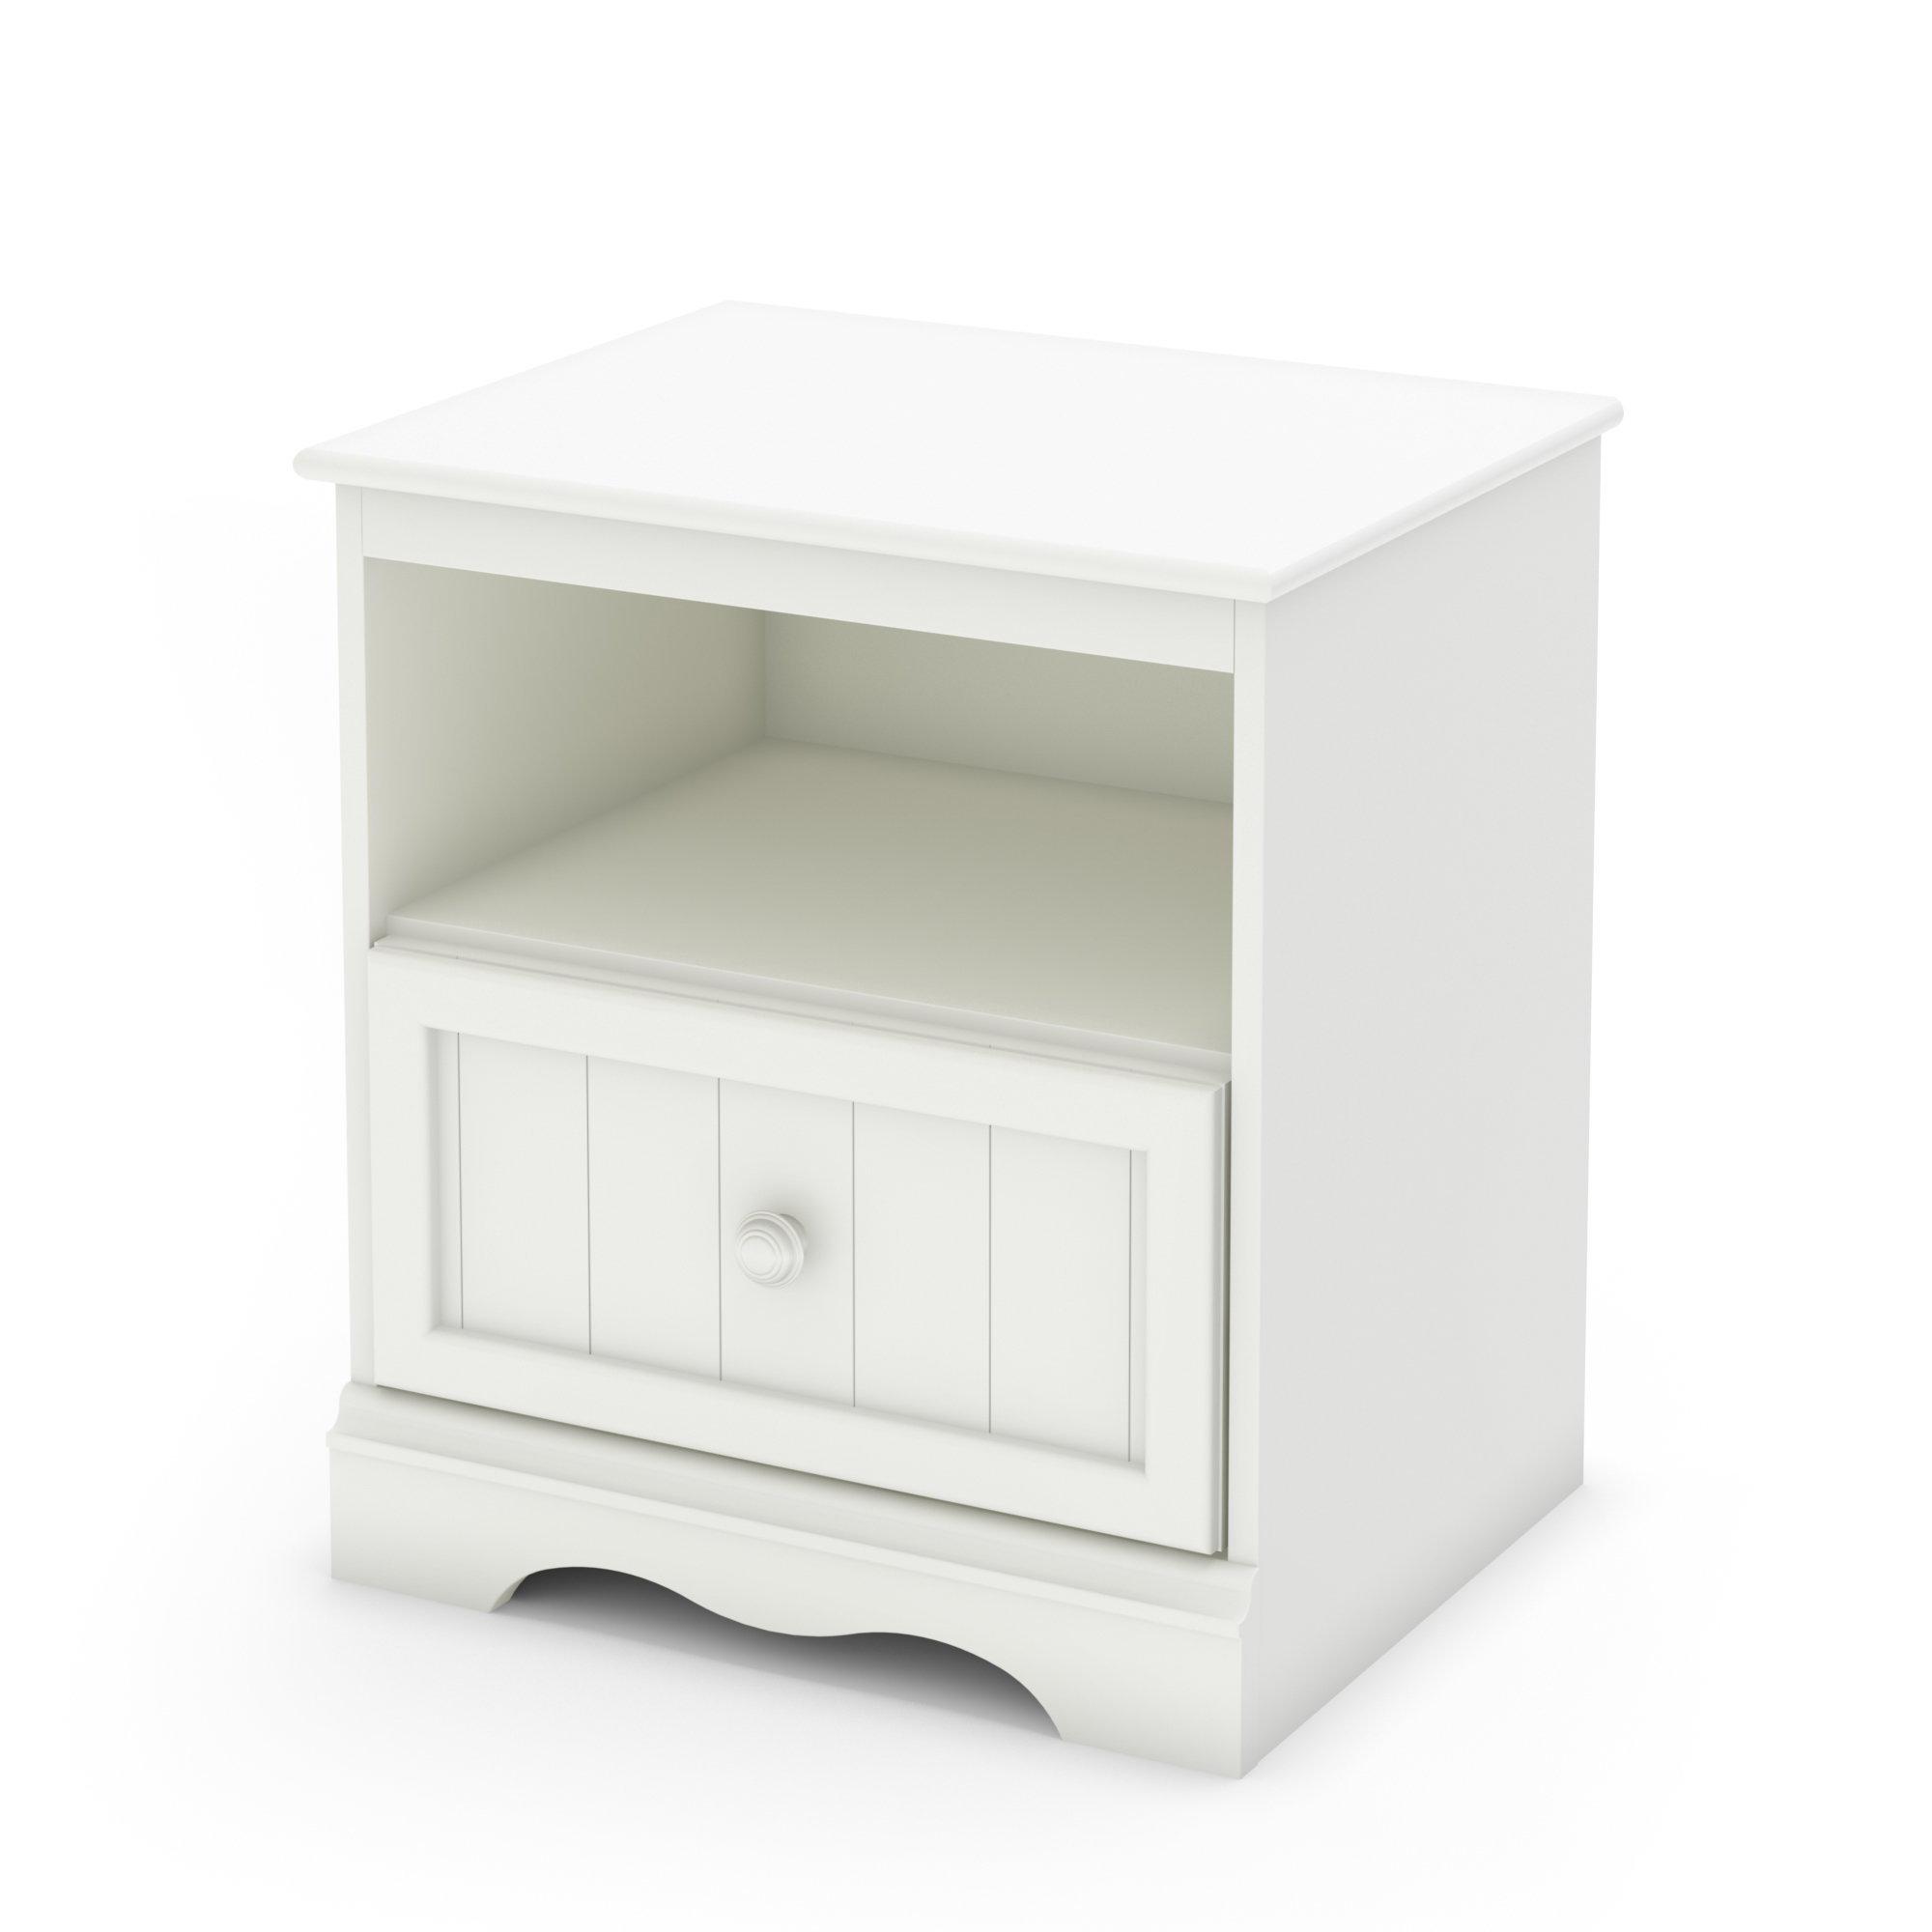 Childrens Youth Room 3 Pieces Set Cabinet 3-trg Bed Bedside Table White New 